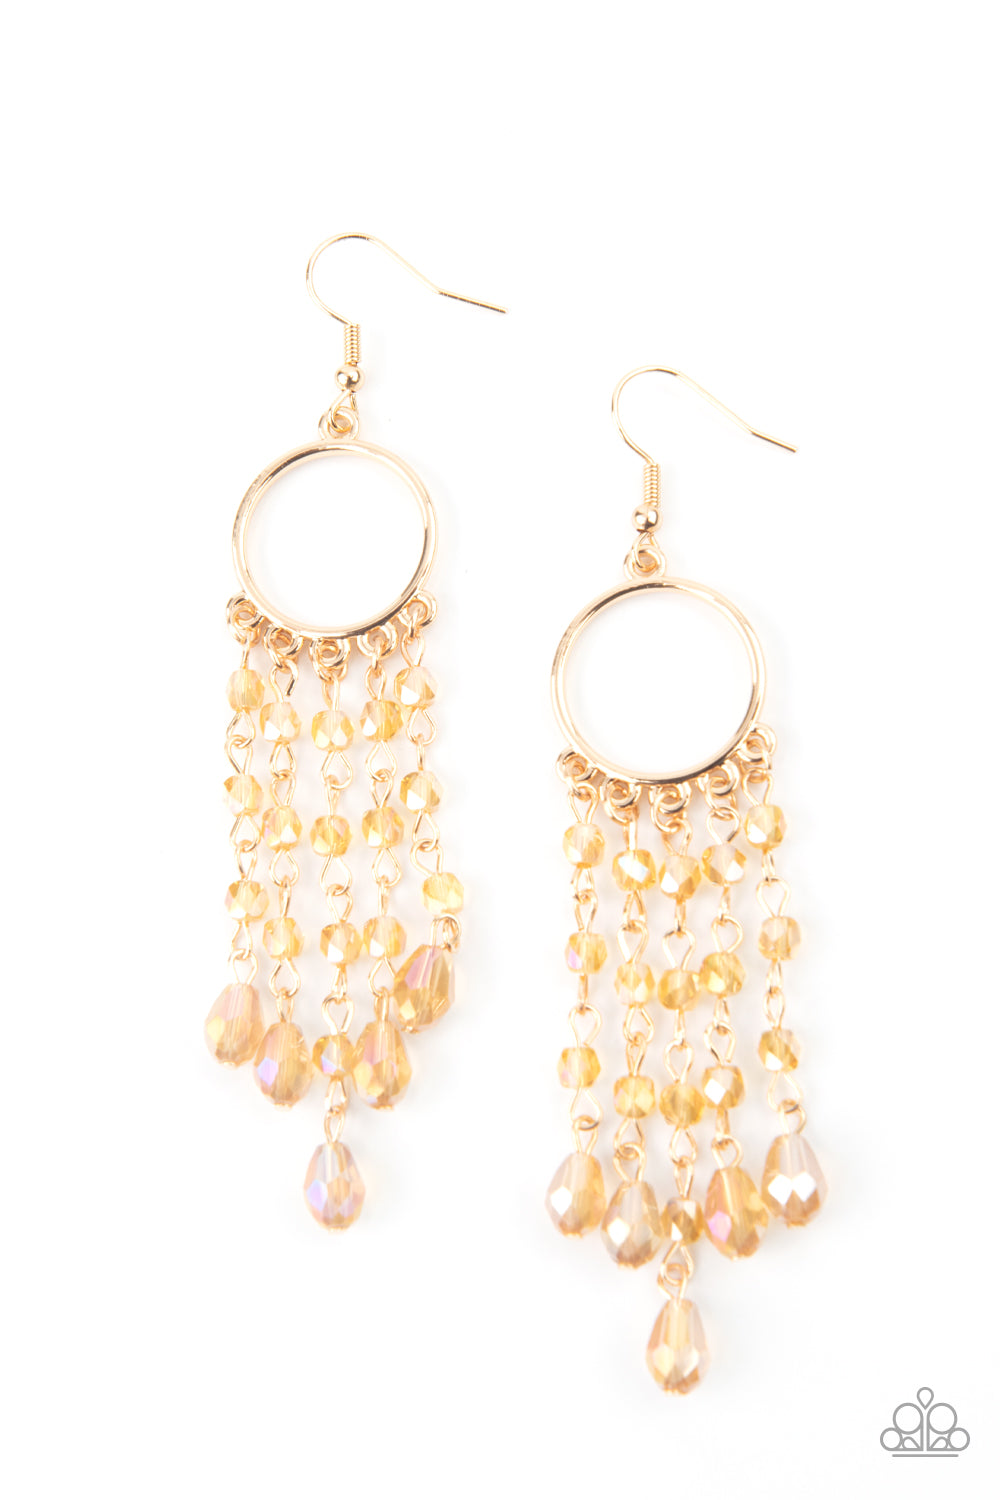 Paparazzi Accessories Dazzling Delicious - Gold Earrings - Lady T Accessories